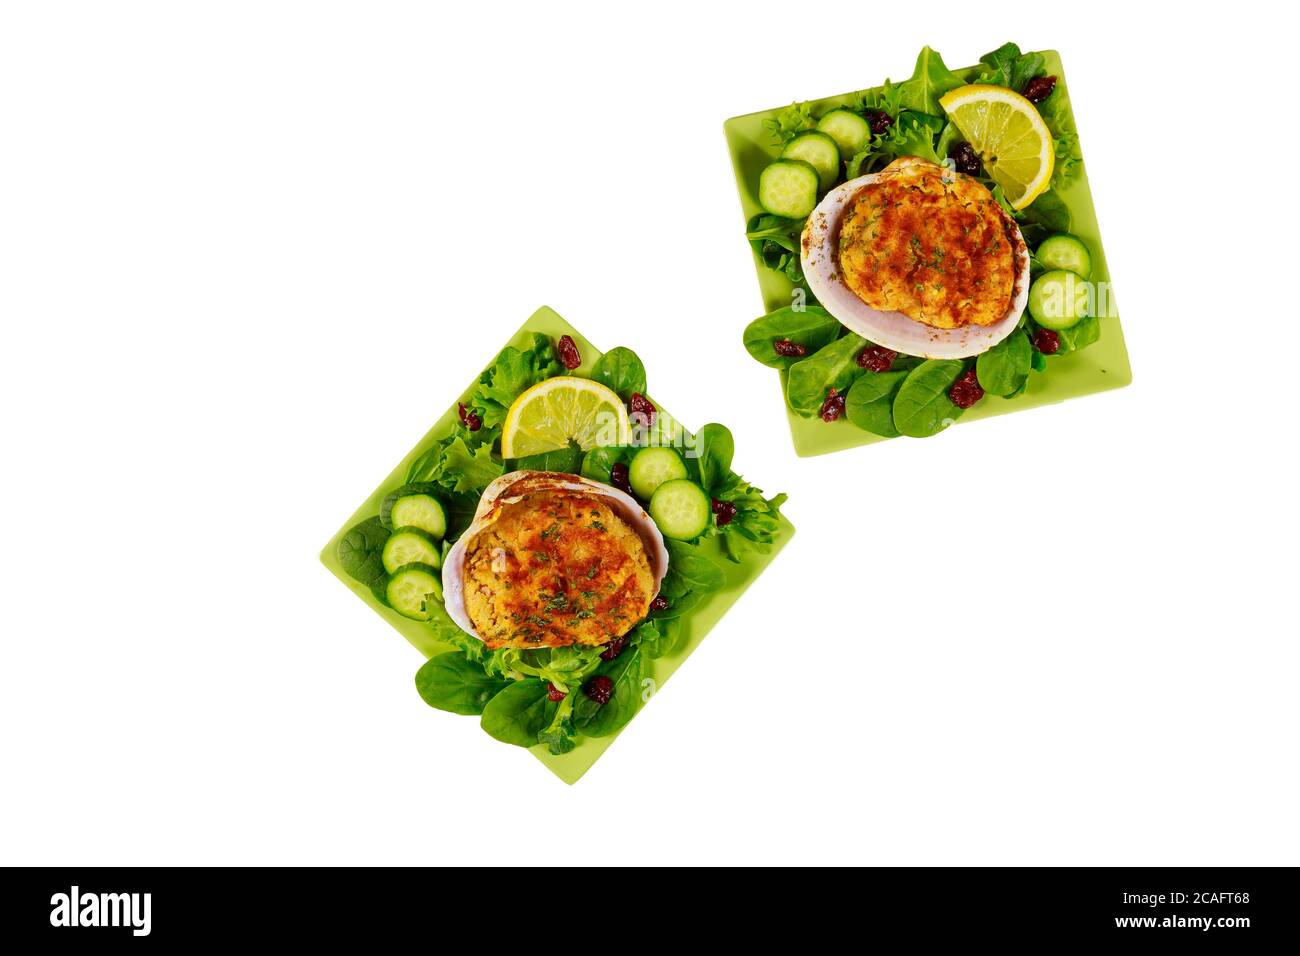 Stuffed clams with crabmeat, minced shrimps and bread crumbs with fresh salad and lemon isolated on white background. Seafood concept. Stock Photo